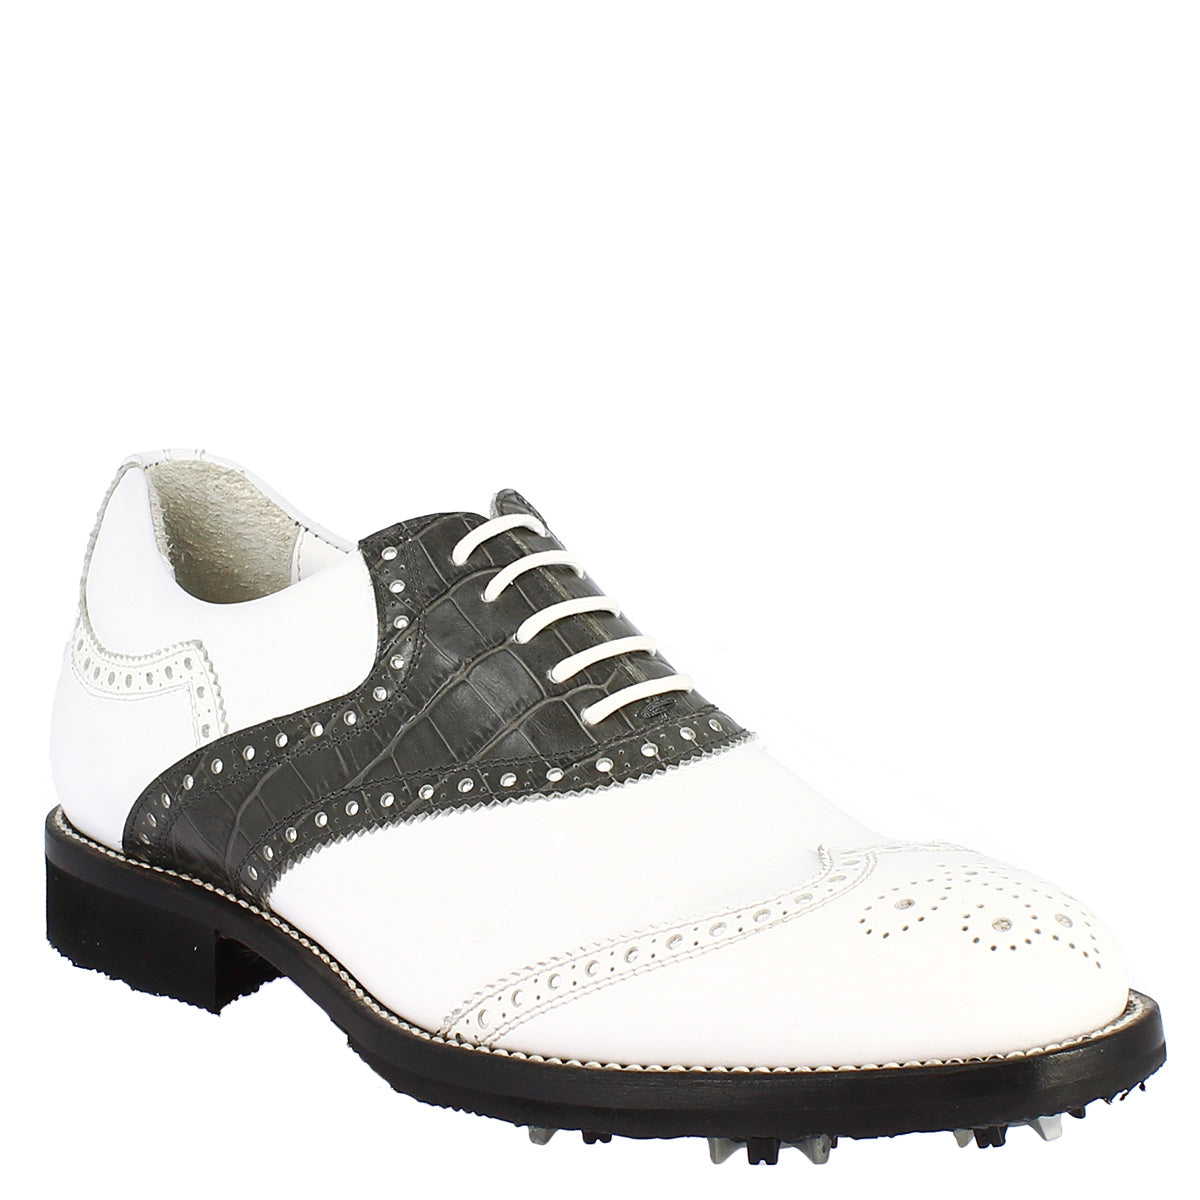 Handcrafted classic men's golf shoes in white grey leather